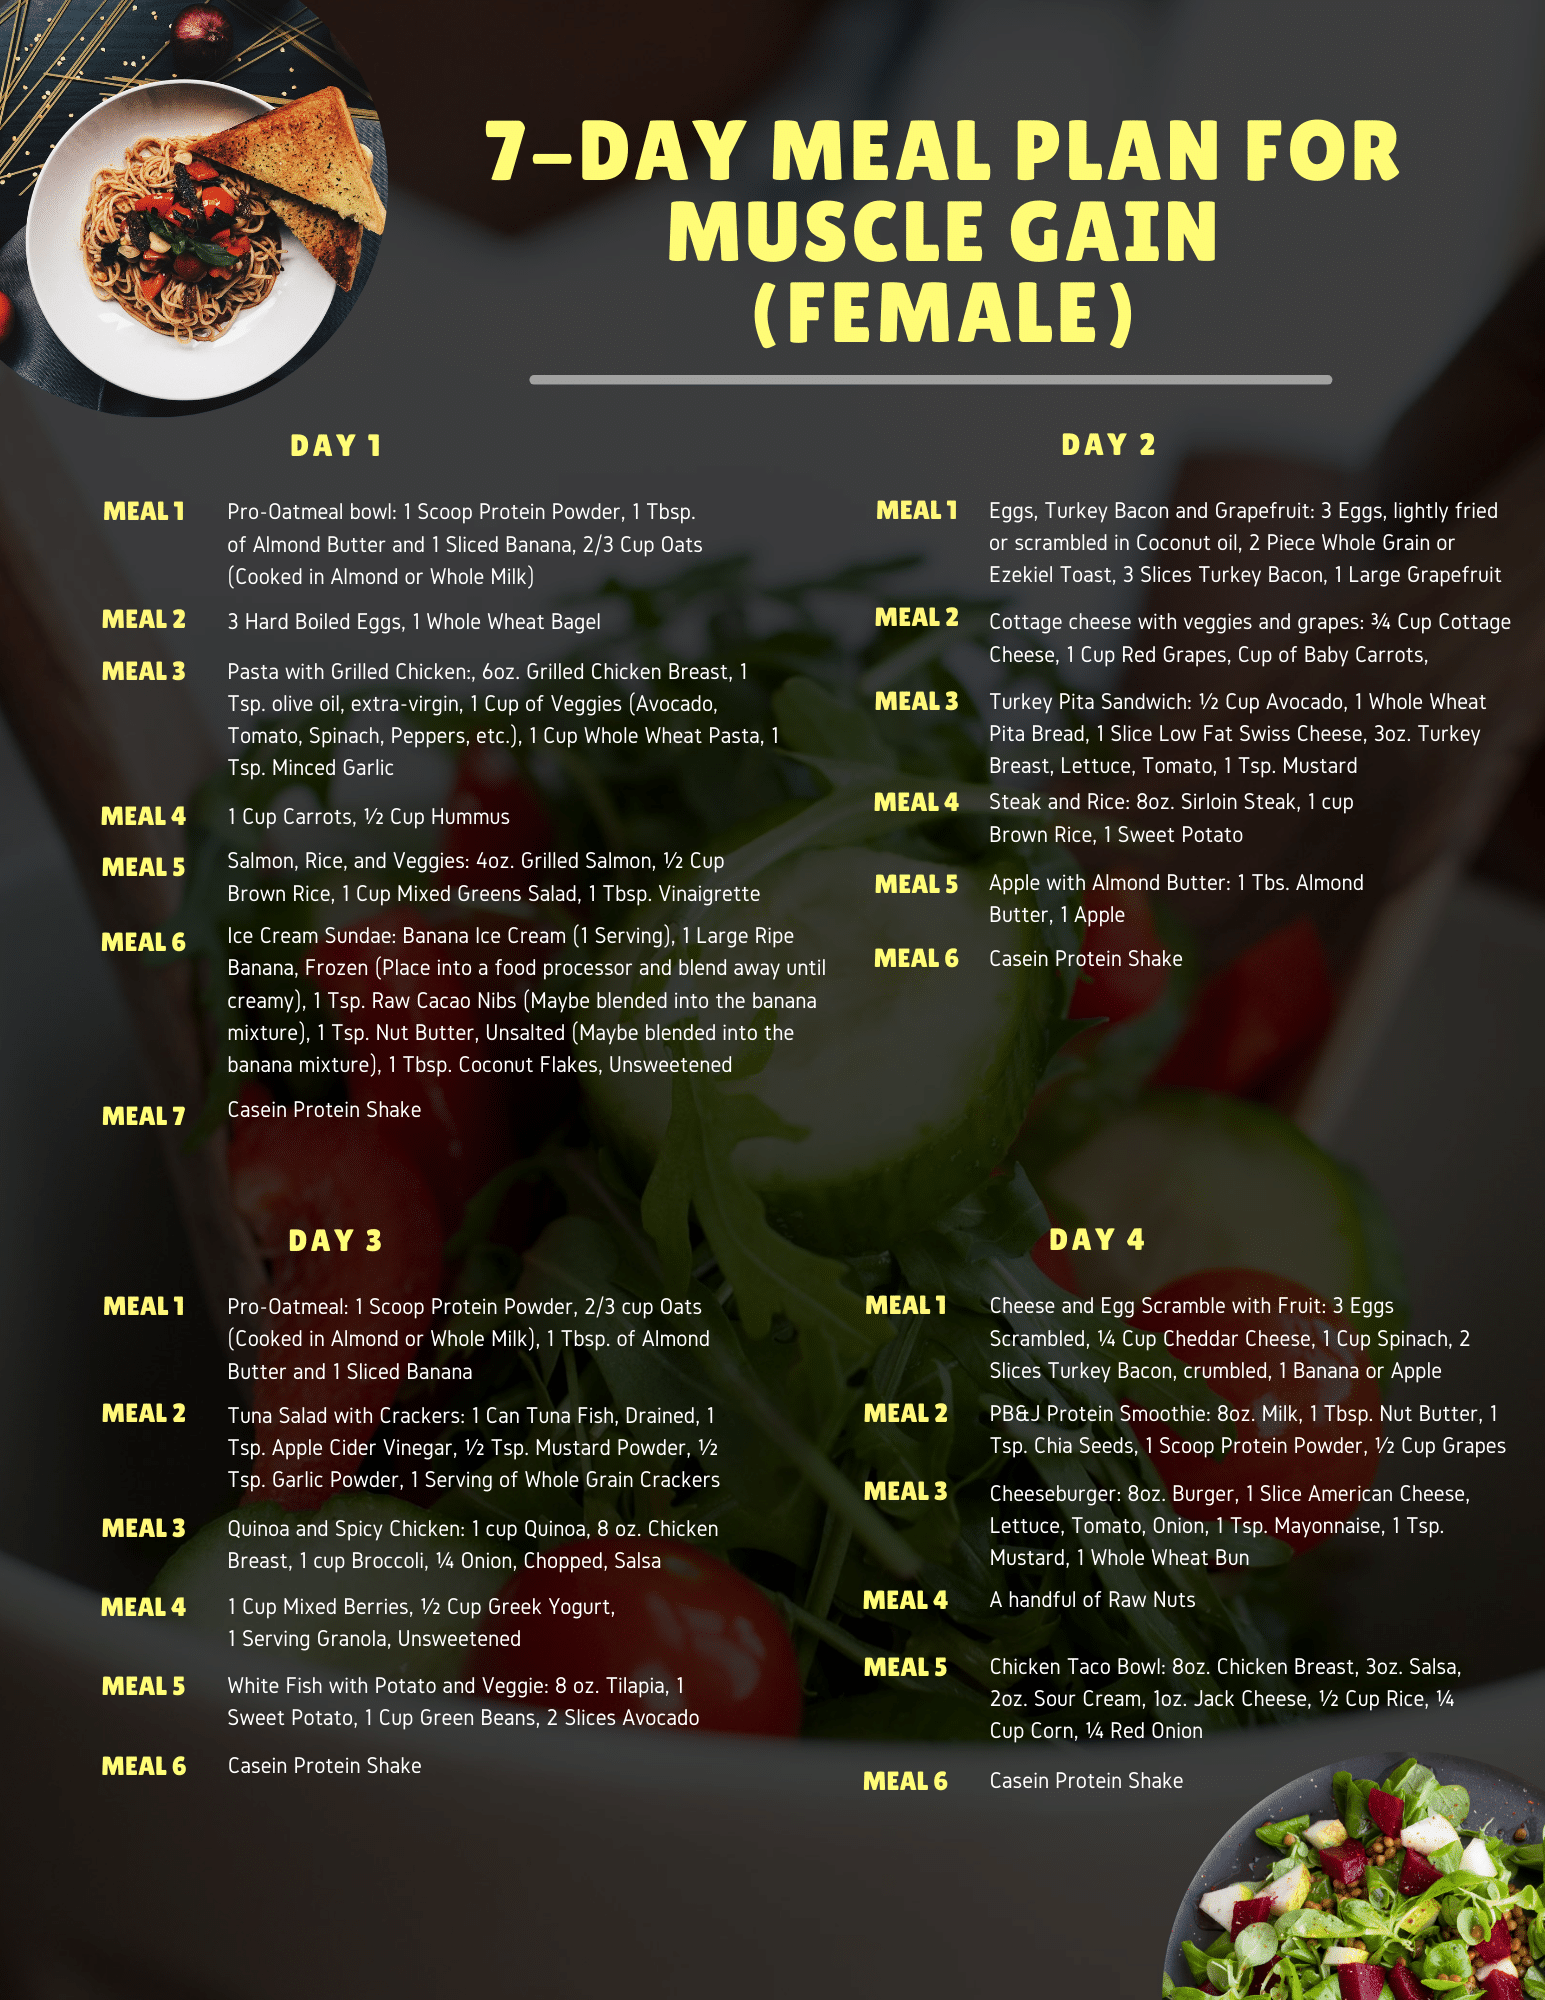 7-Day Meal Plan for Muscle Gain (Female)